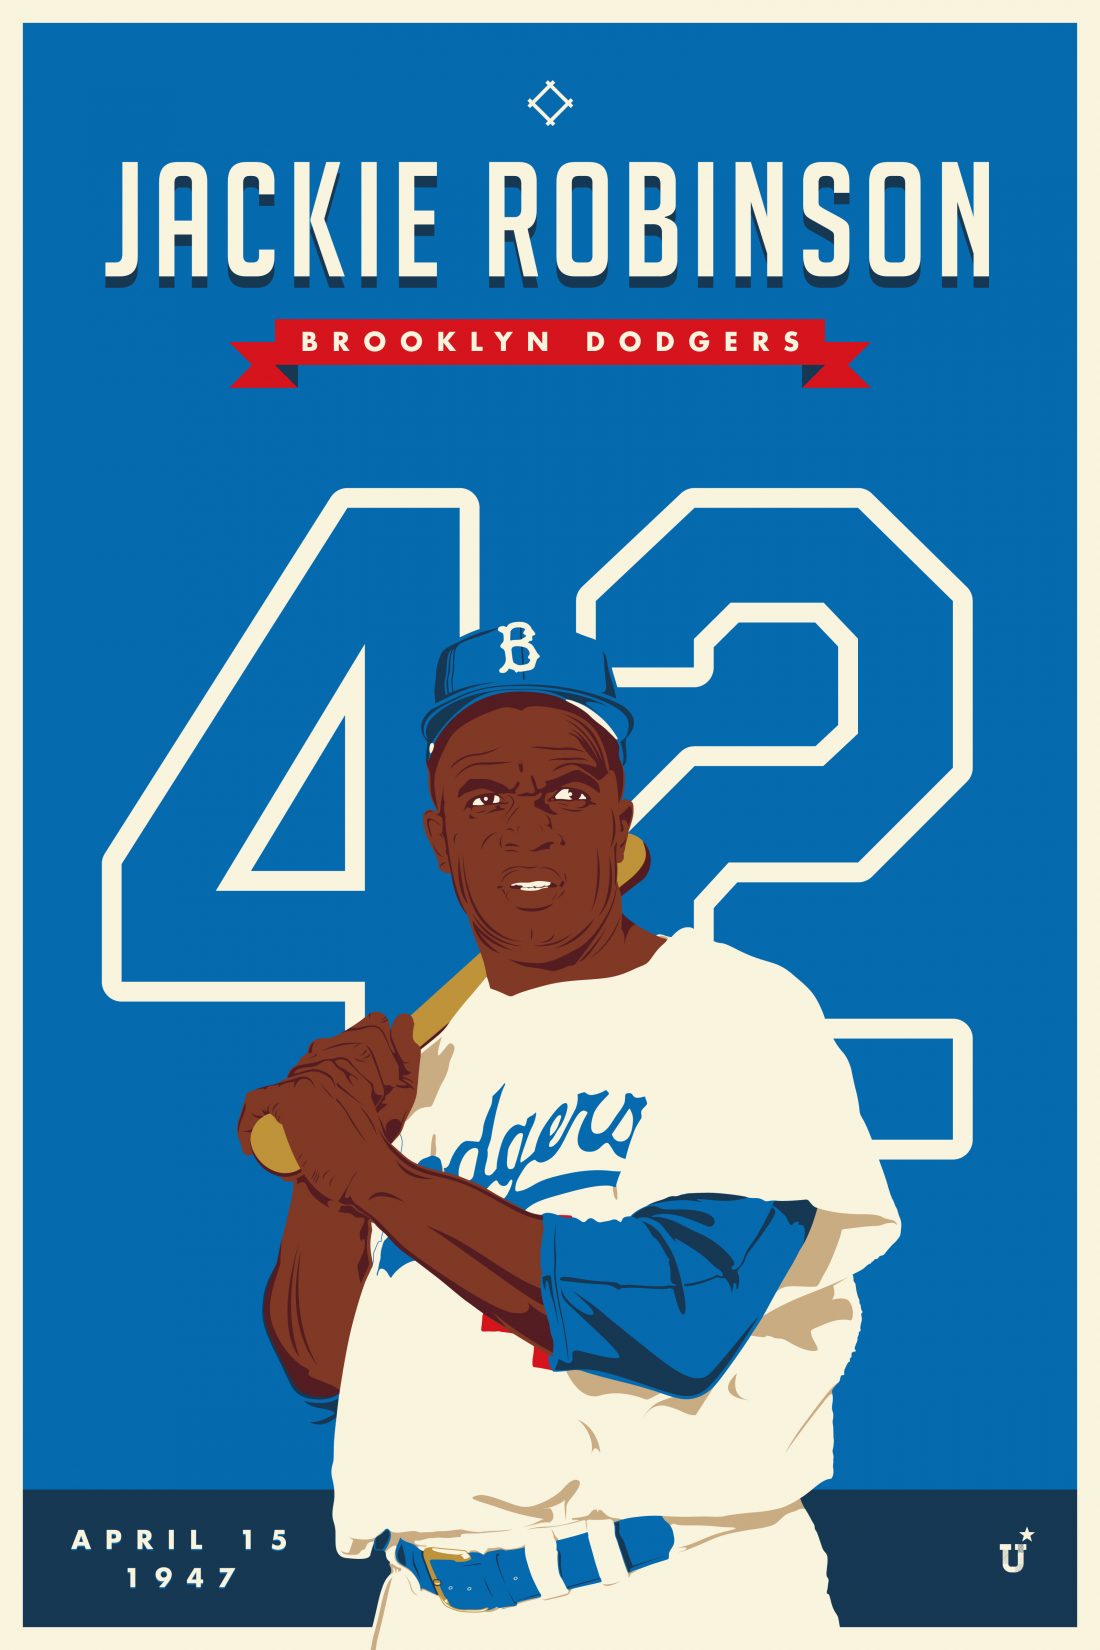 UNOFFICiAL ATHLETIC | jackie_robinson_dodgers_poster_v1